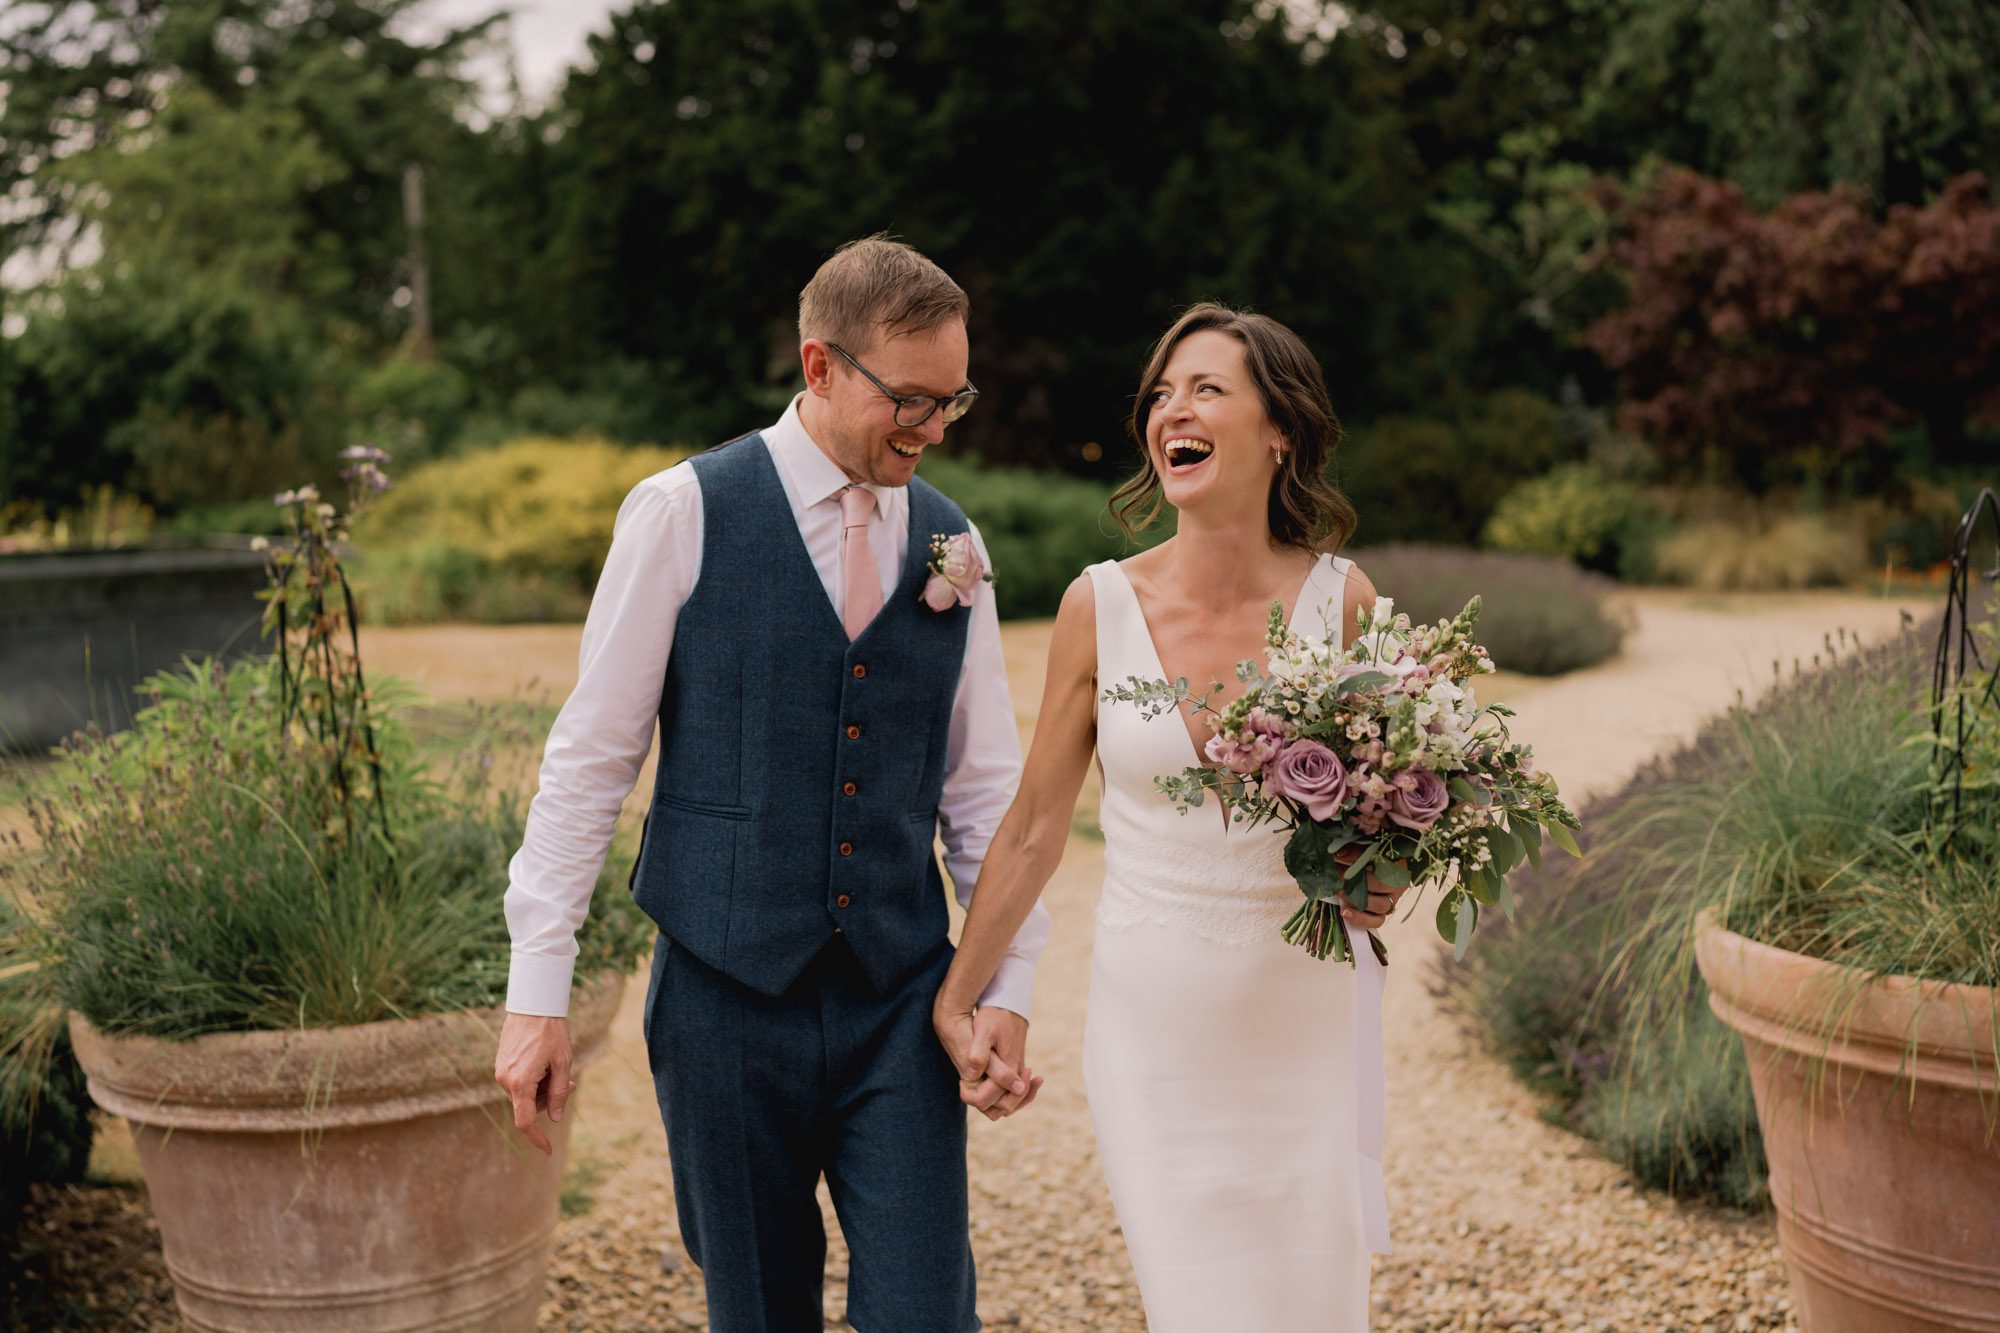 A bride and groom share laughter as they take a stroll on their wedding day at Dorney Court in Buckinghamshire.